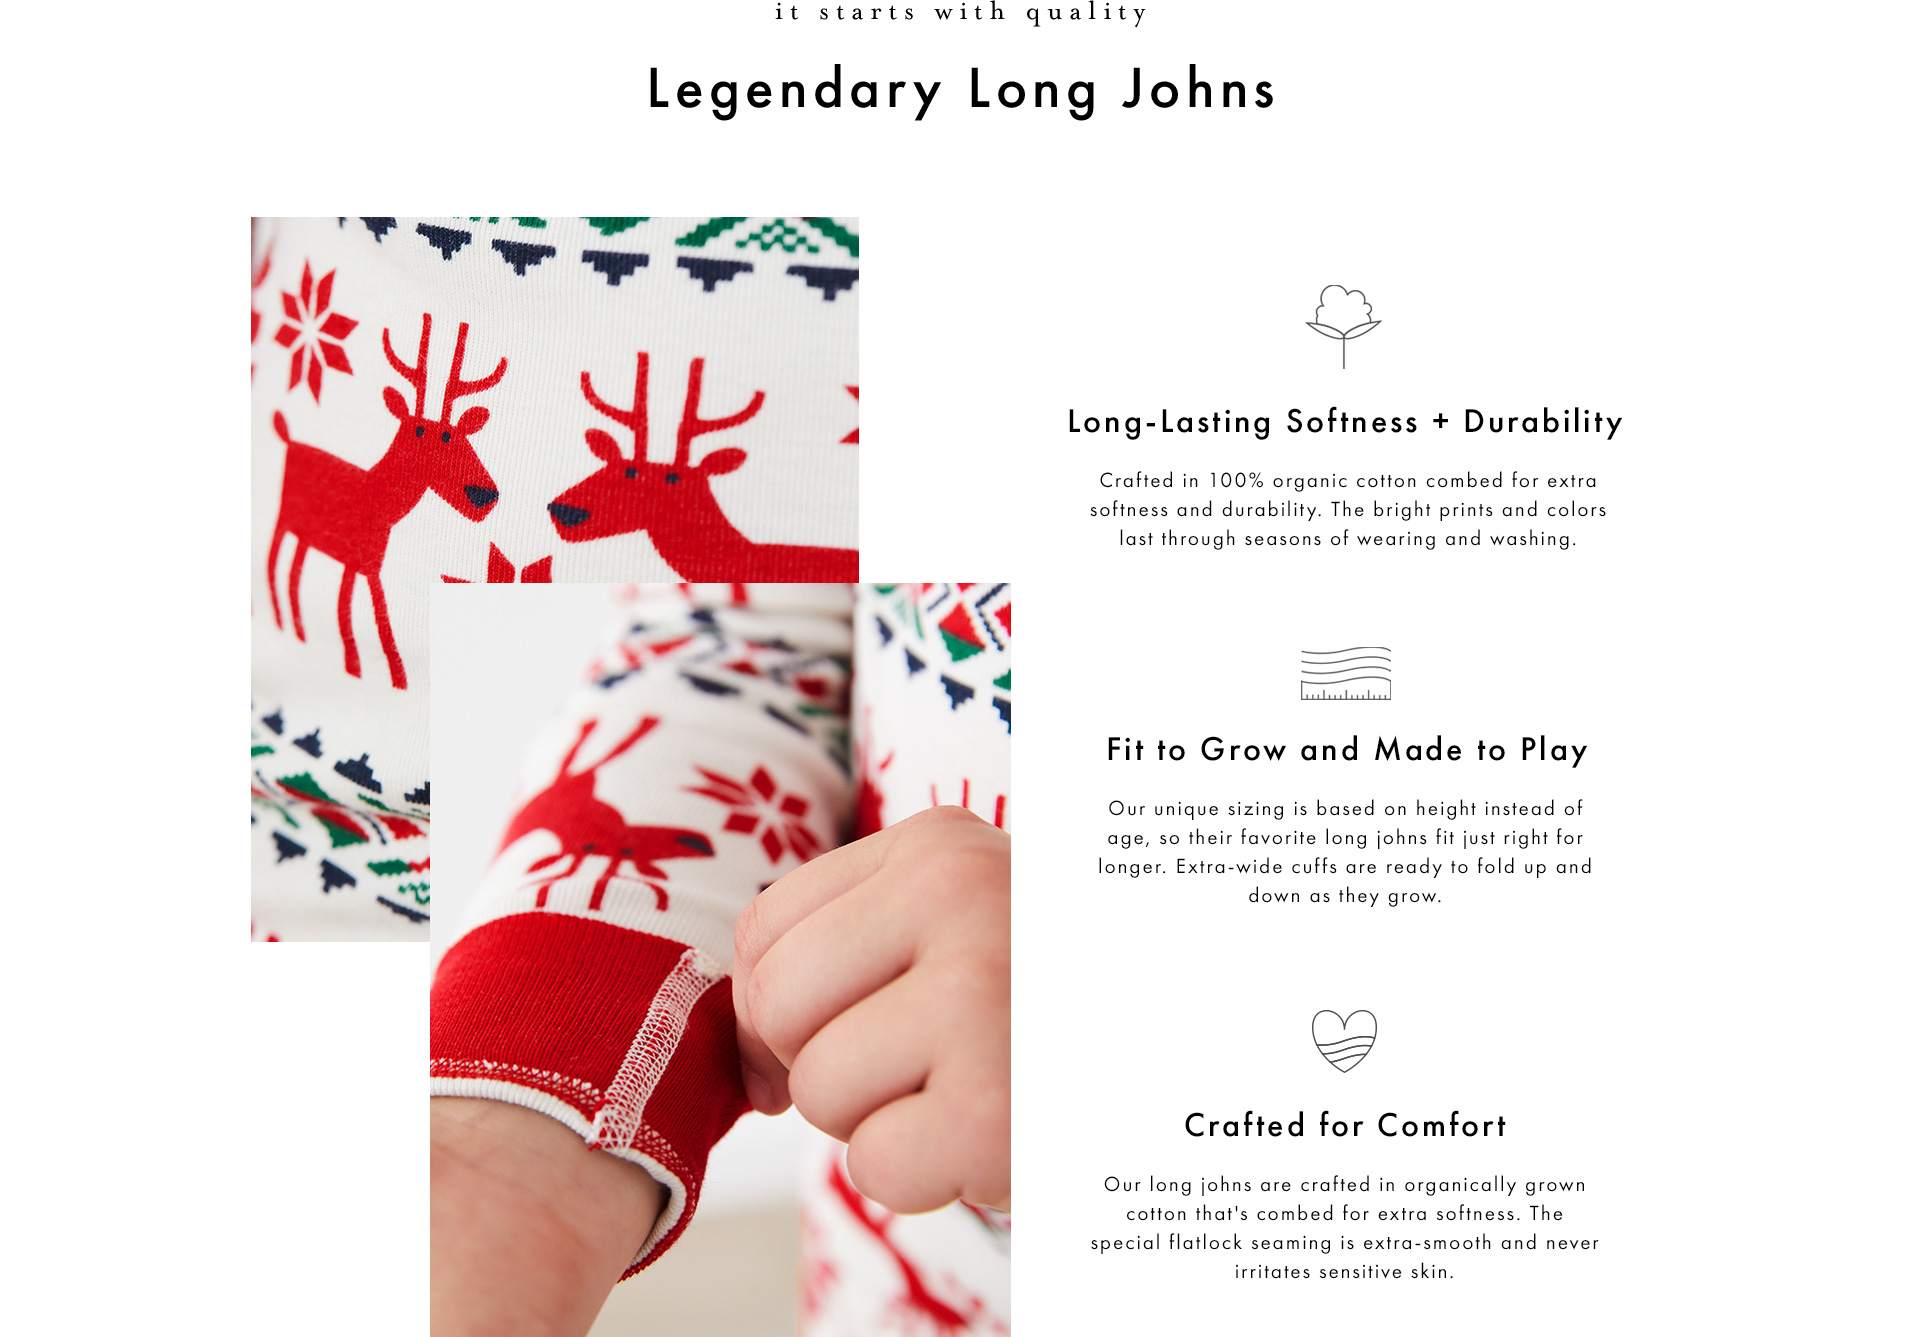 It starts with quality -- Legendary Long Johns